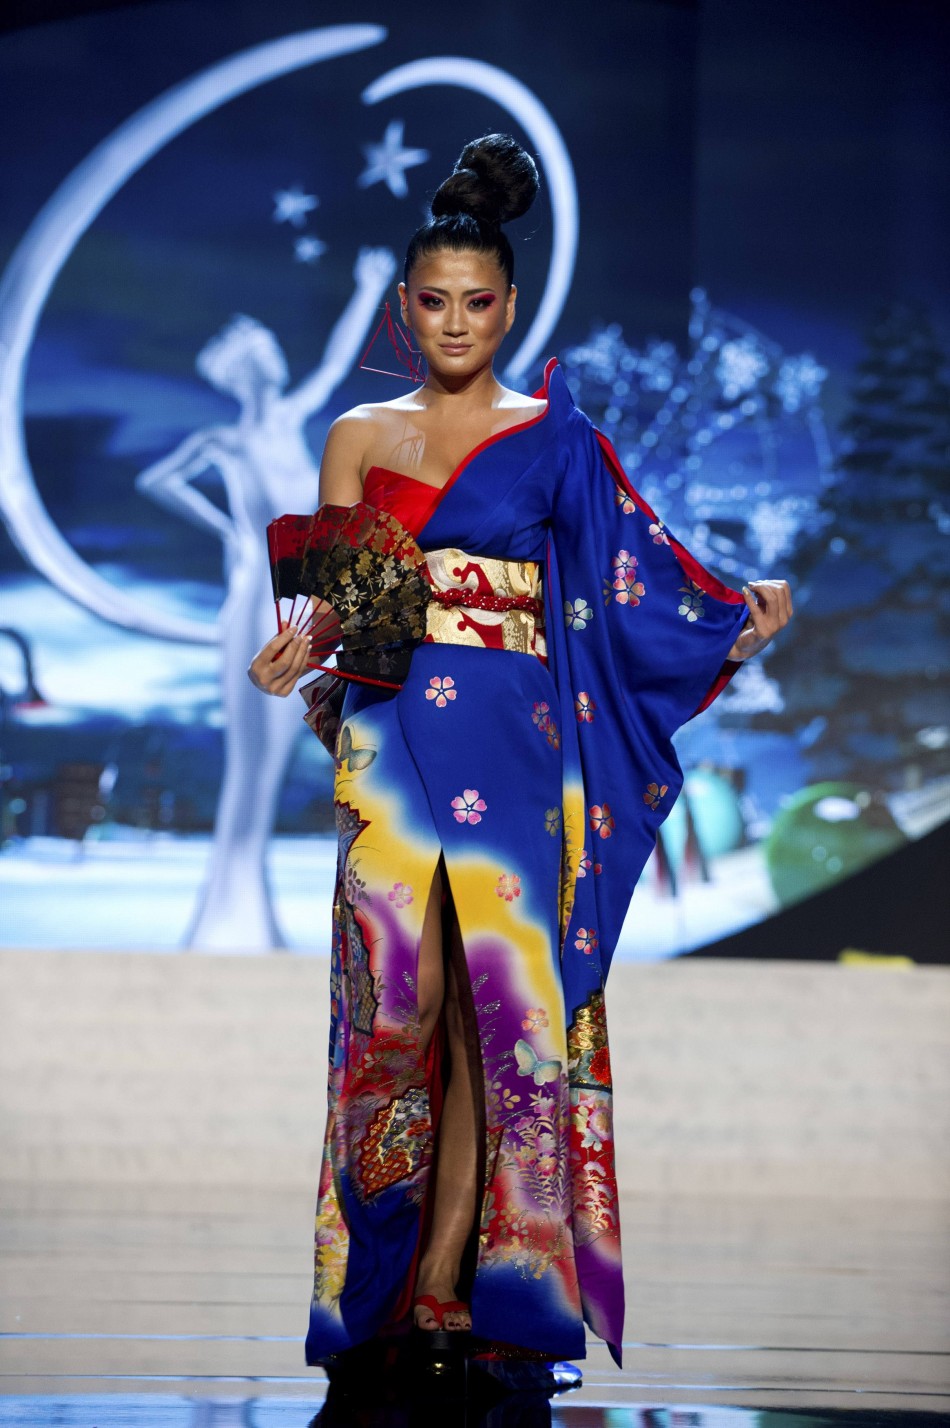 Miss Japan Ayako Hara on stage at the 2012 Miss Universe National Costume Show at PH Live in Las Vegas